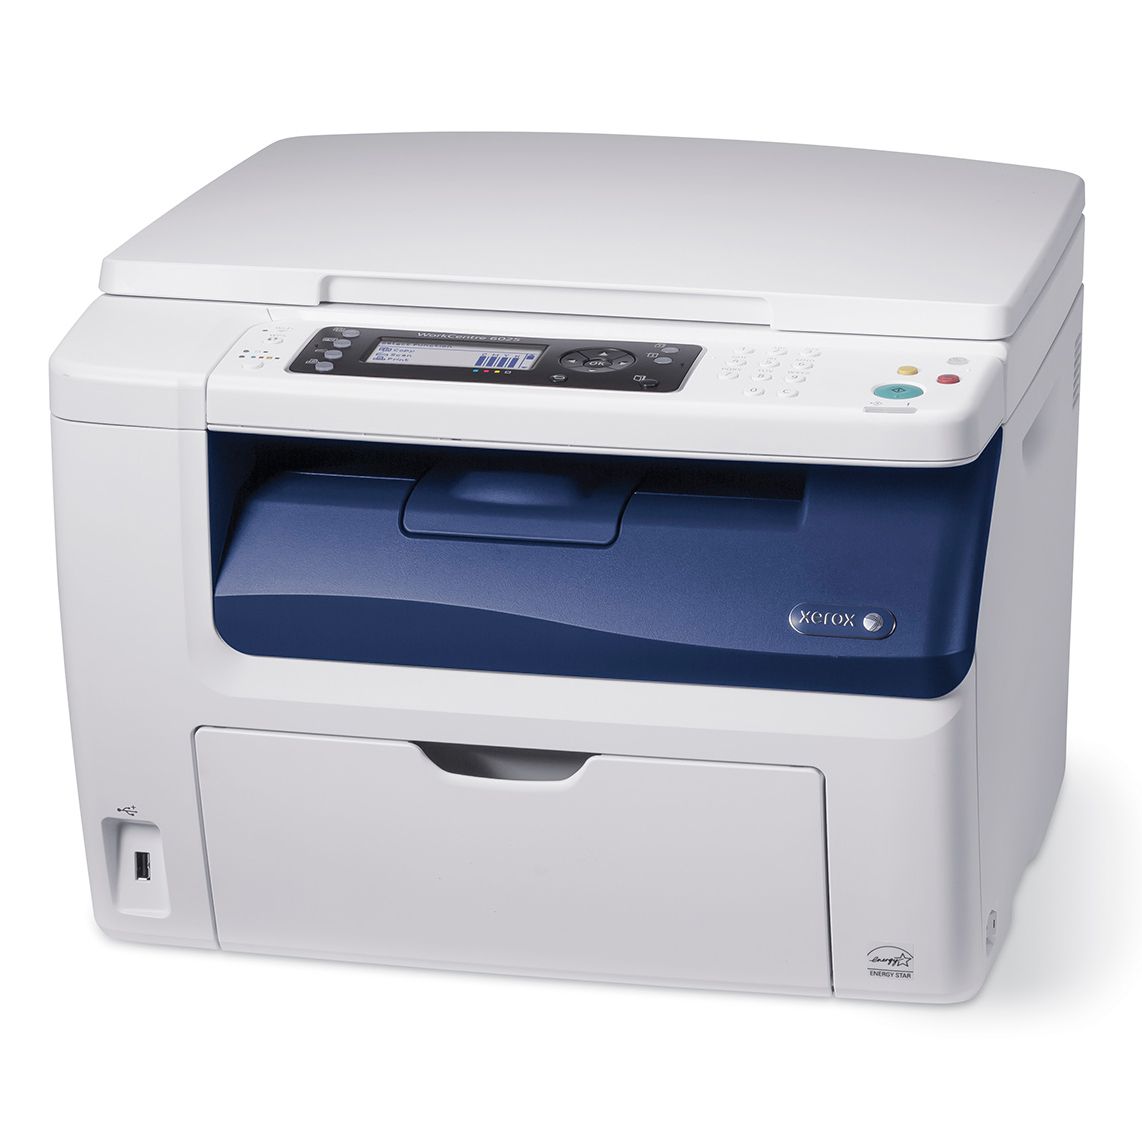  Multifunctional laser color Xerox WorkCentre 6025, Wireless, A4 